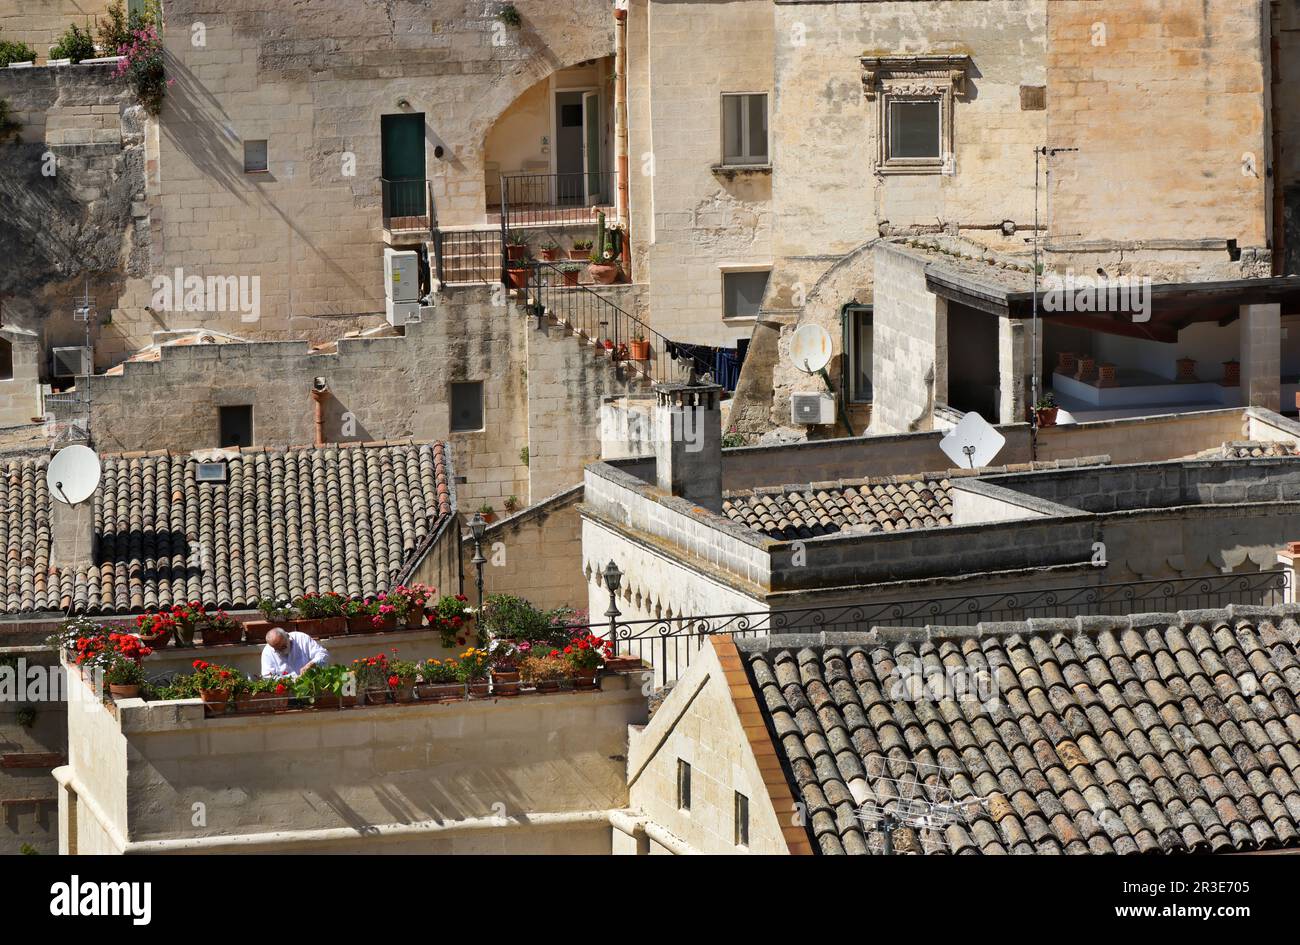 Moments in local daily life in the historic Sassi of Matera, Basilicata region of Italy. Rooftop gardener old man. Stock Photo